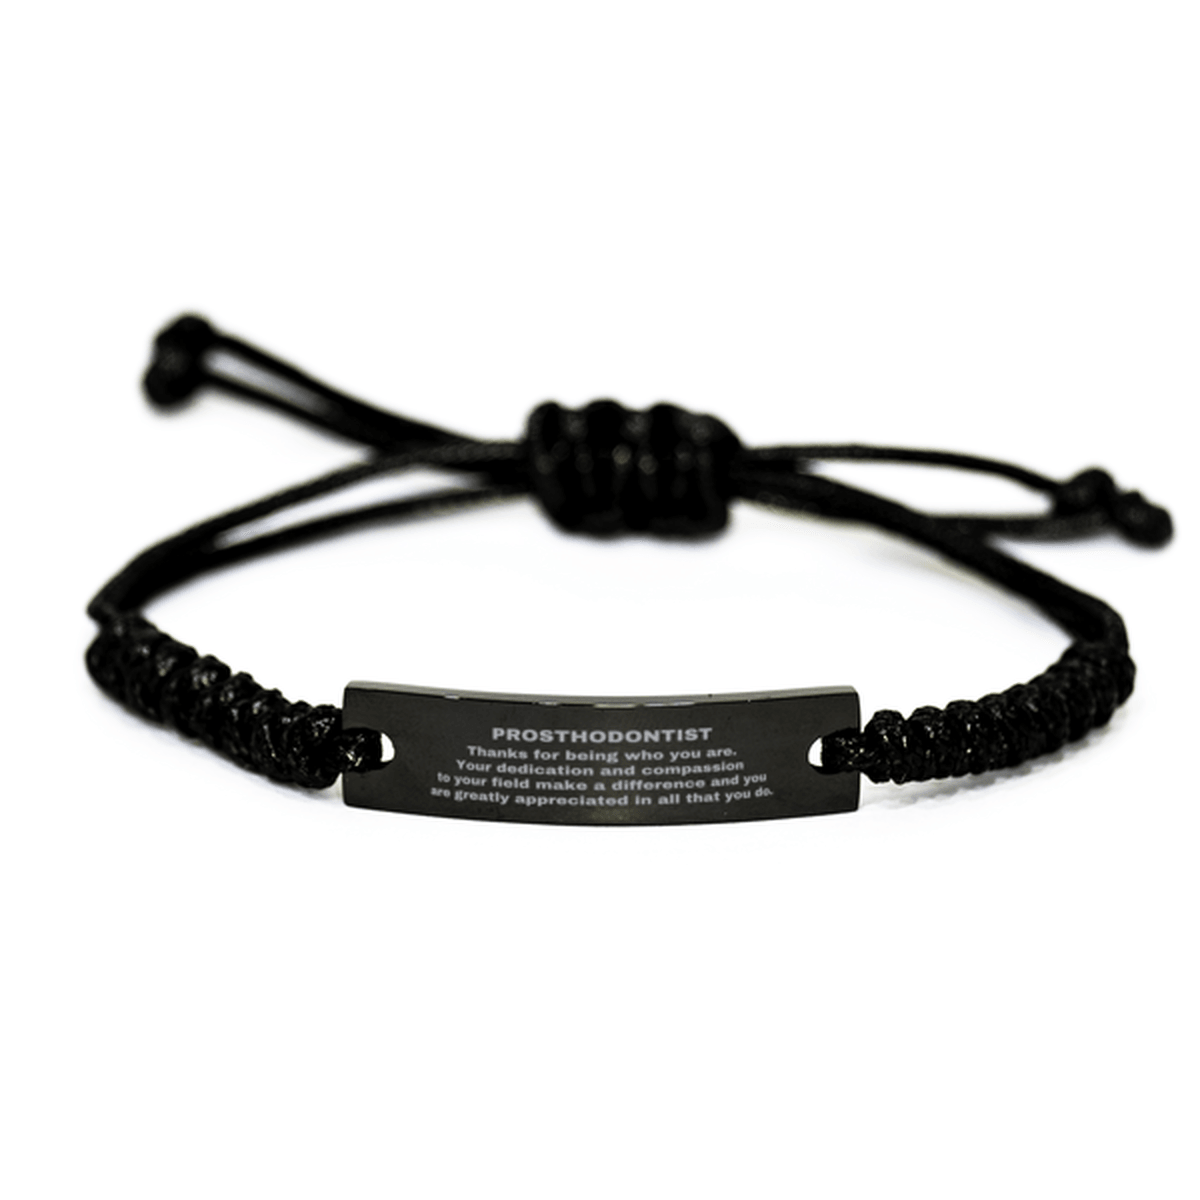 Prosthodontist Black Braided Leather Rope Engraved Bracelet - Thanks for being who you are - Birthday Christmas Jewelry Gifts Coworkers Colleague Boss - Mallard Moon Gift Shop